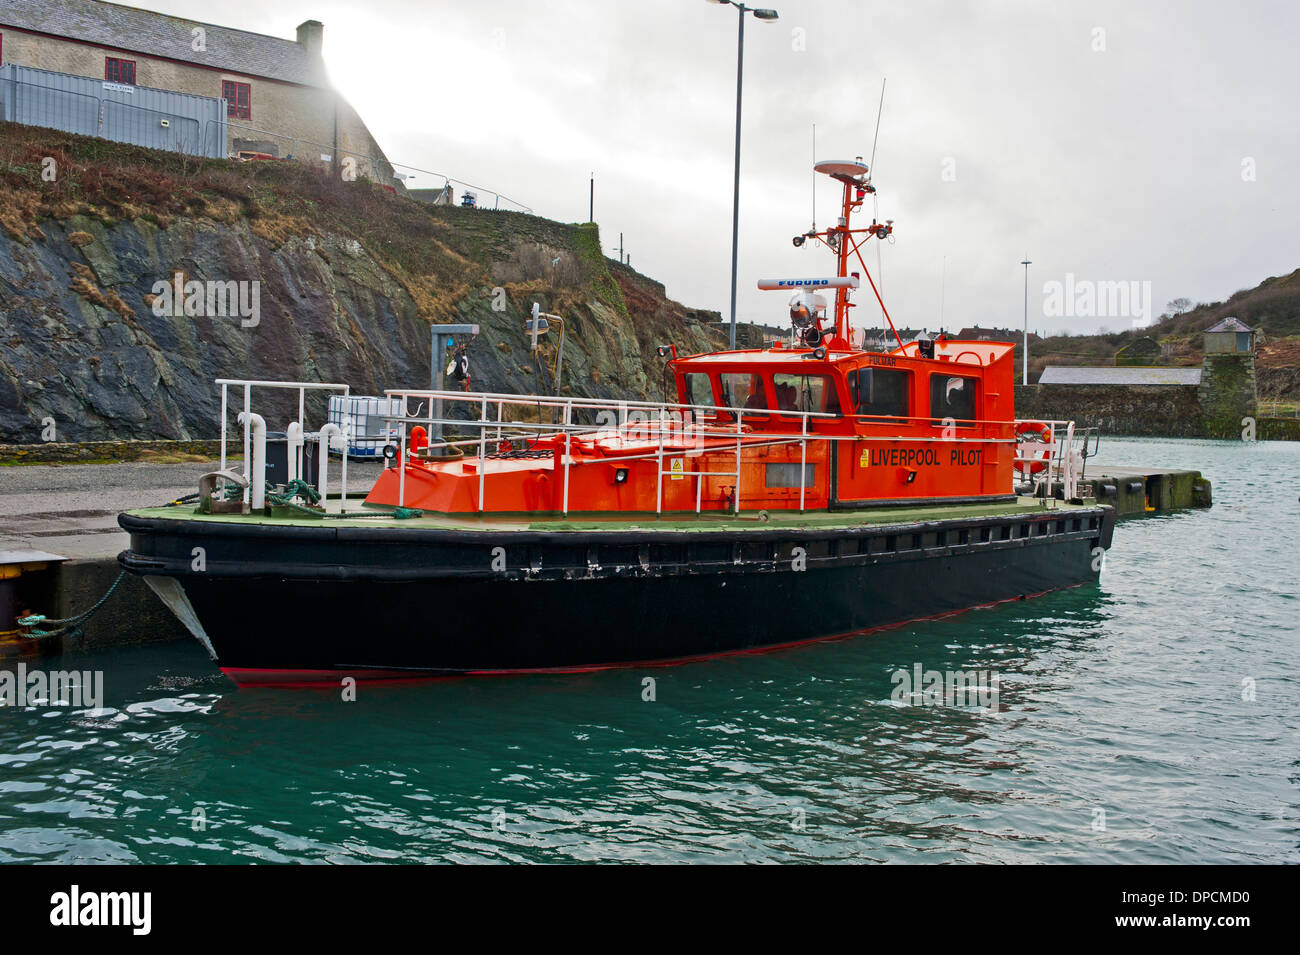 Amlwch Port Anglesey North Wales Uk Fulmer Liverpool pilot launch Stock Photo